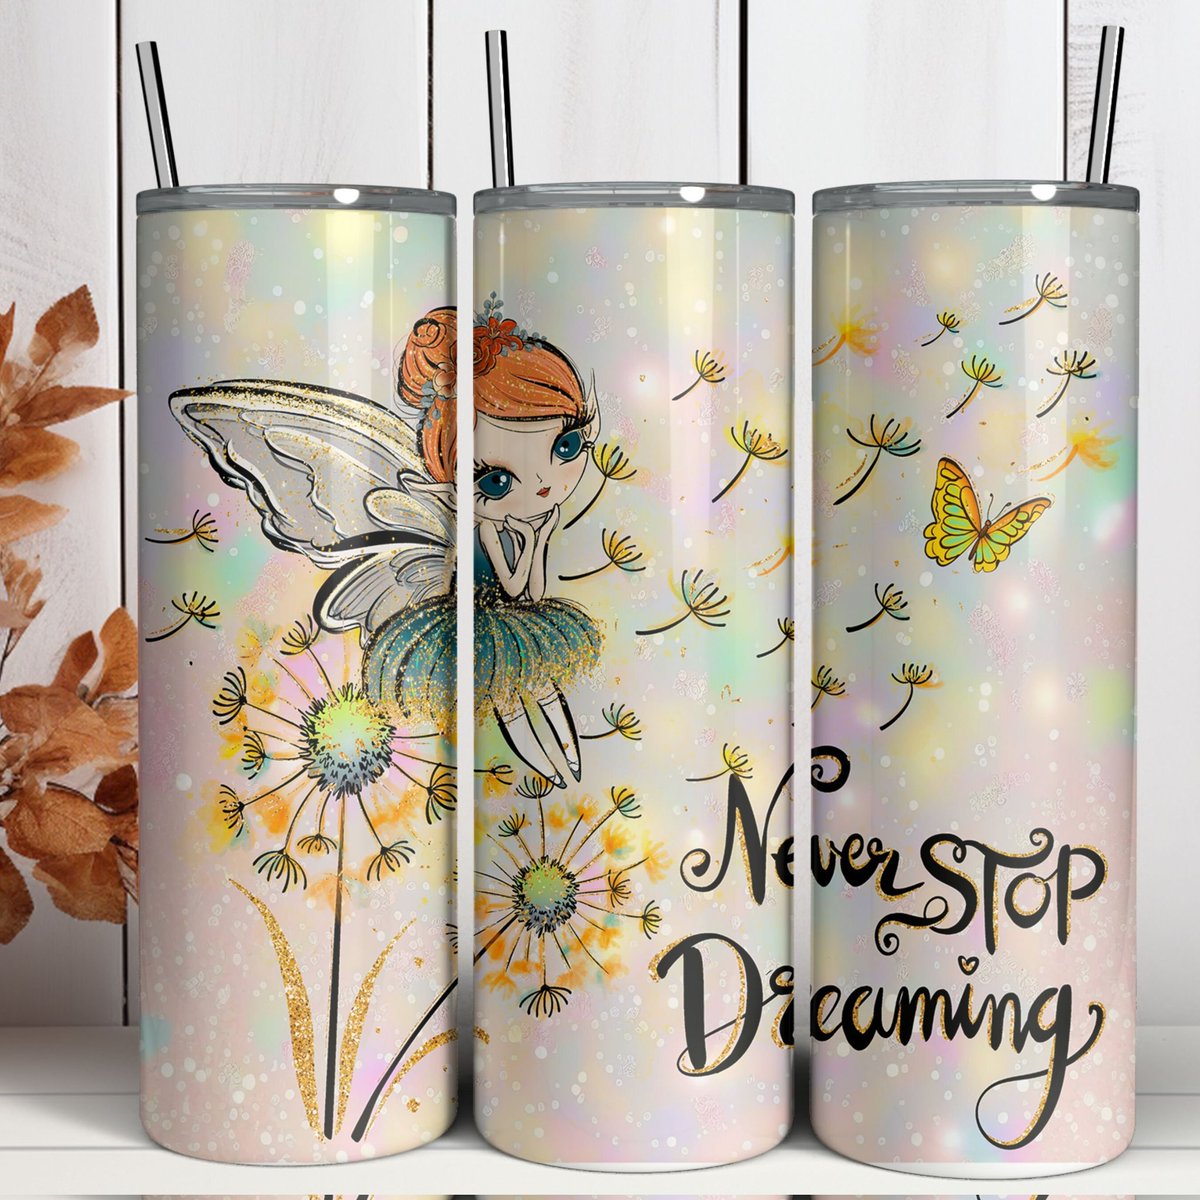 Special tumbler design, for beautiful days. Don't forget: never stop dreaming. Order it now on Etsy👇
#GiftIdeas
#mothersday2024
#MothersDayLove
#fairytale
#FairyDesign
#TumblerDesign
#motivational
#InspirationalQuotes
happyshop17.etsy.com/listing/164883…